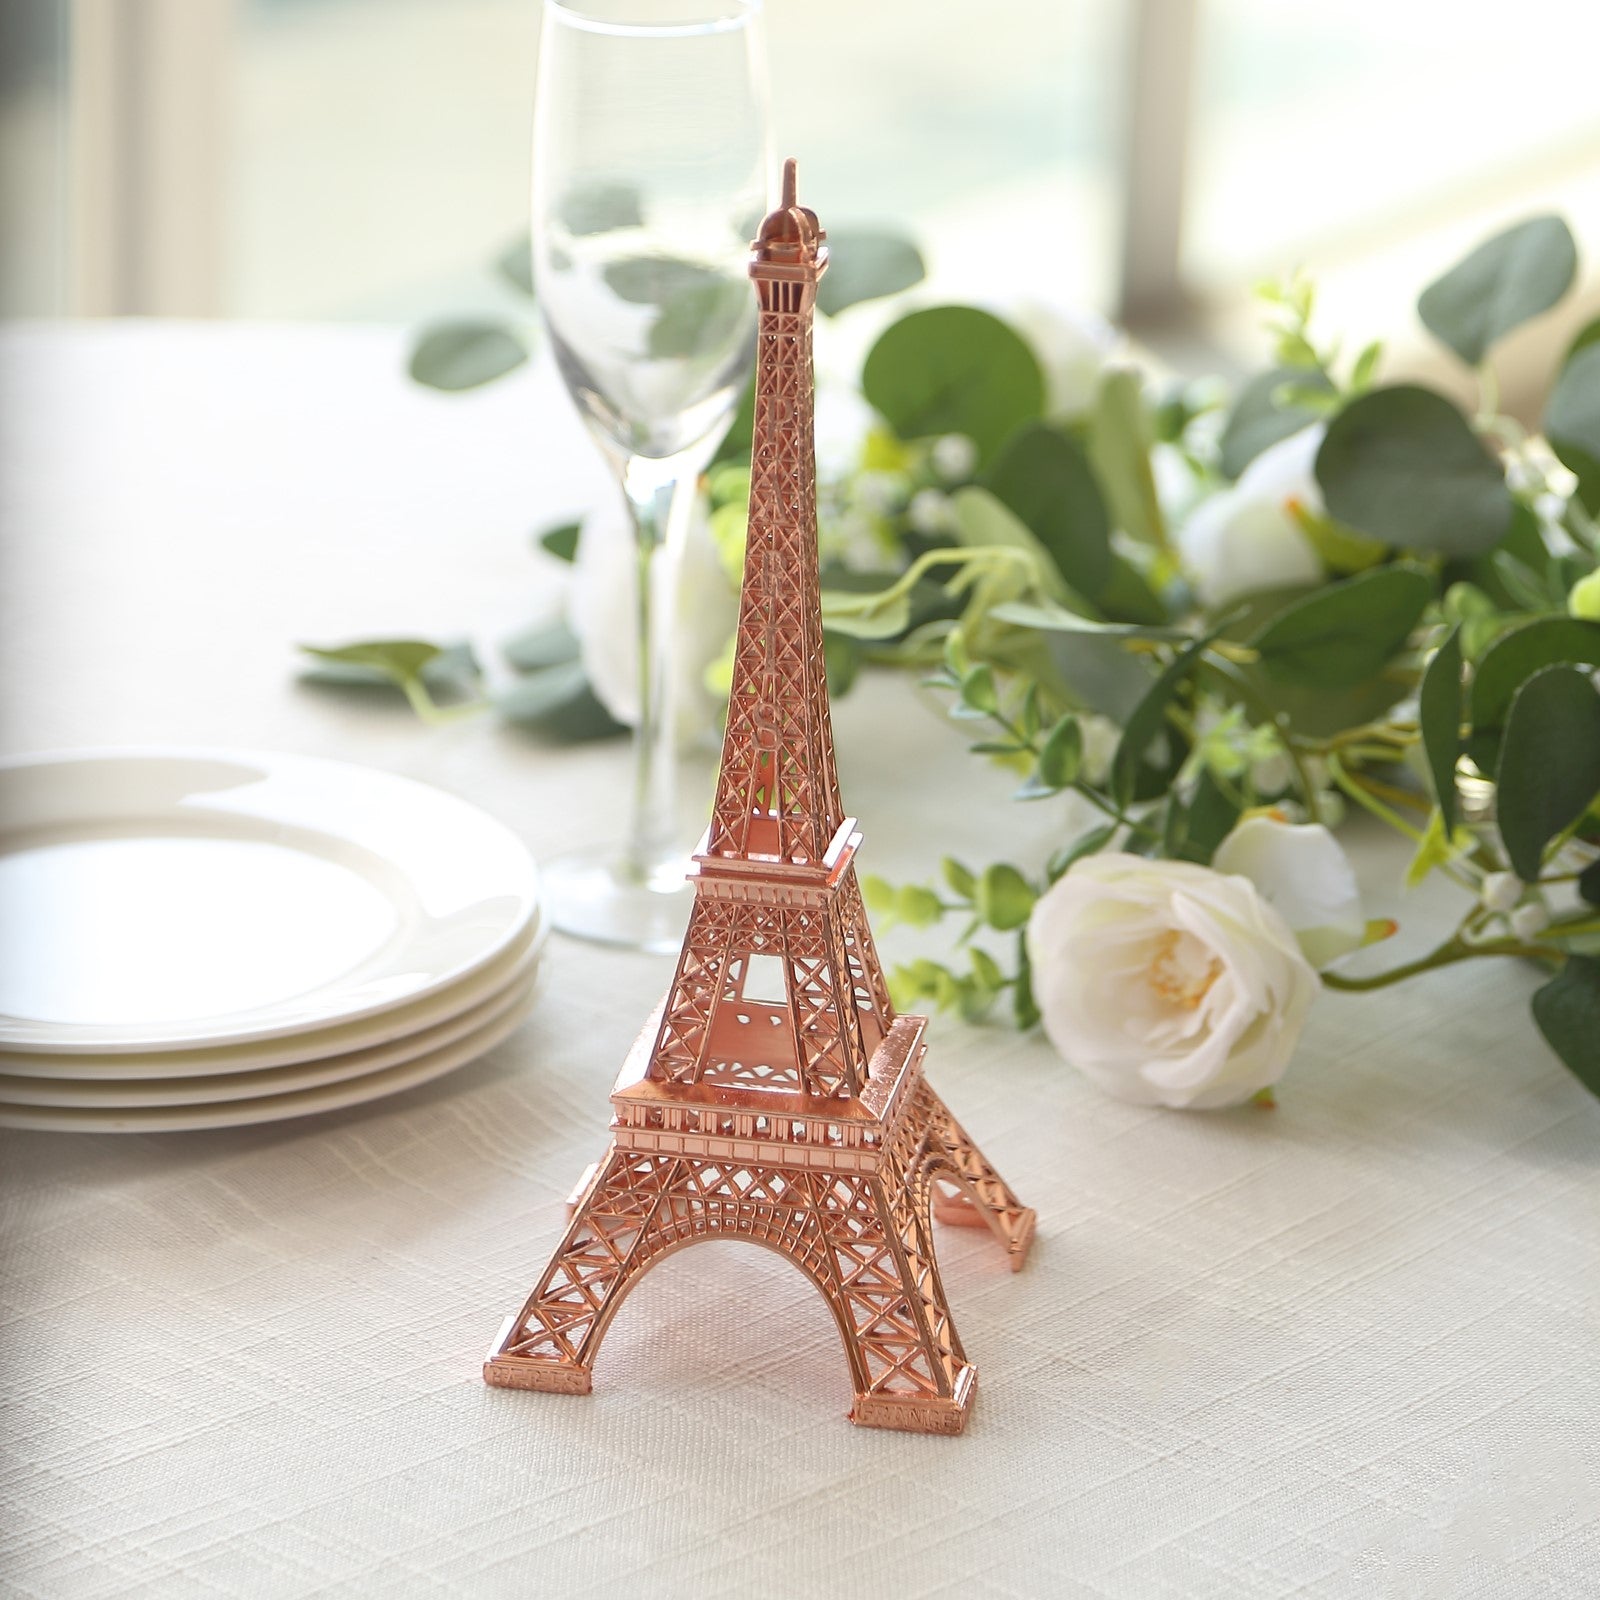 Eiffel Tower Table Centerpiece & Cake Topper